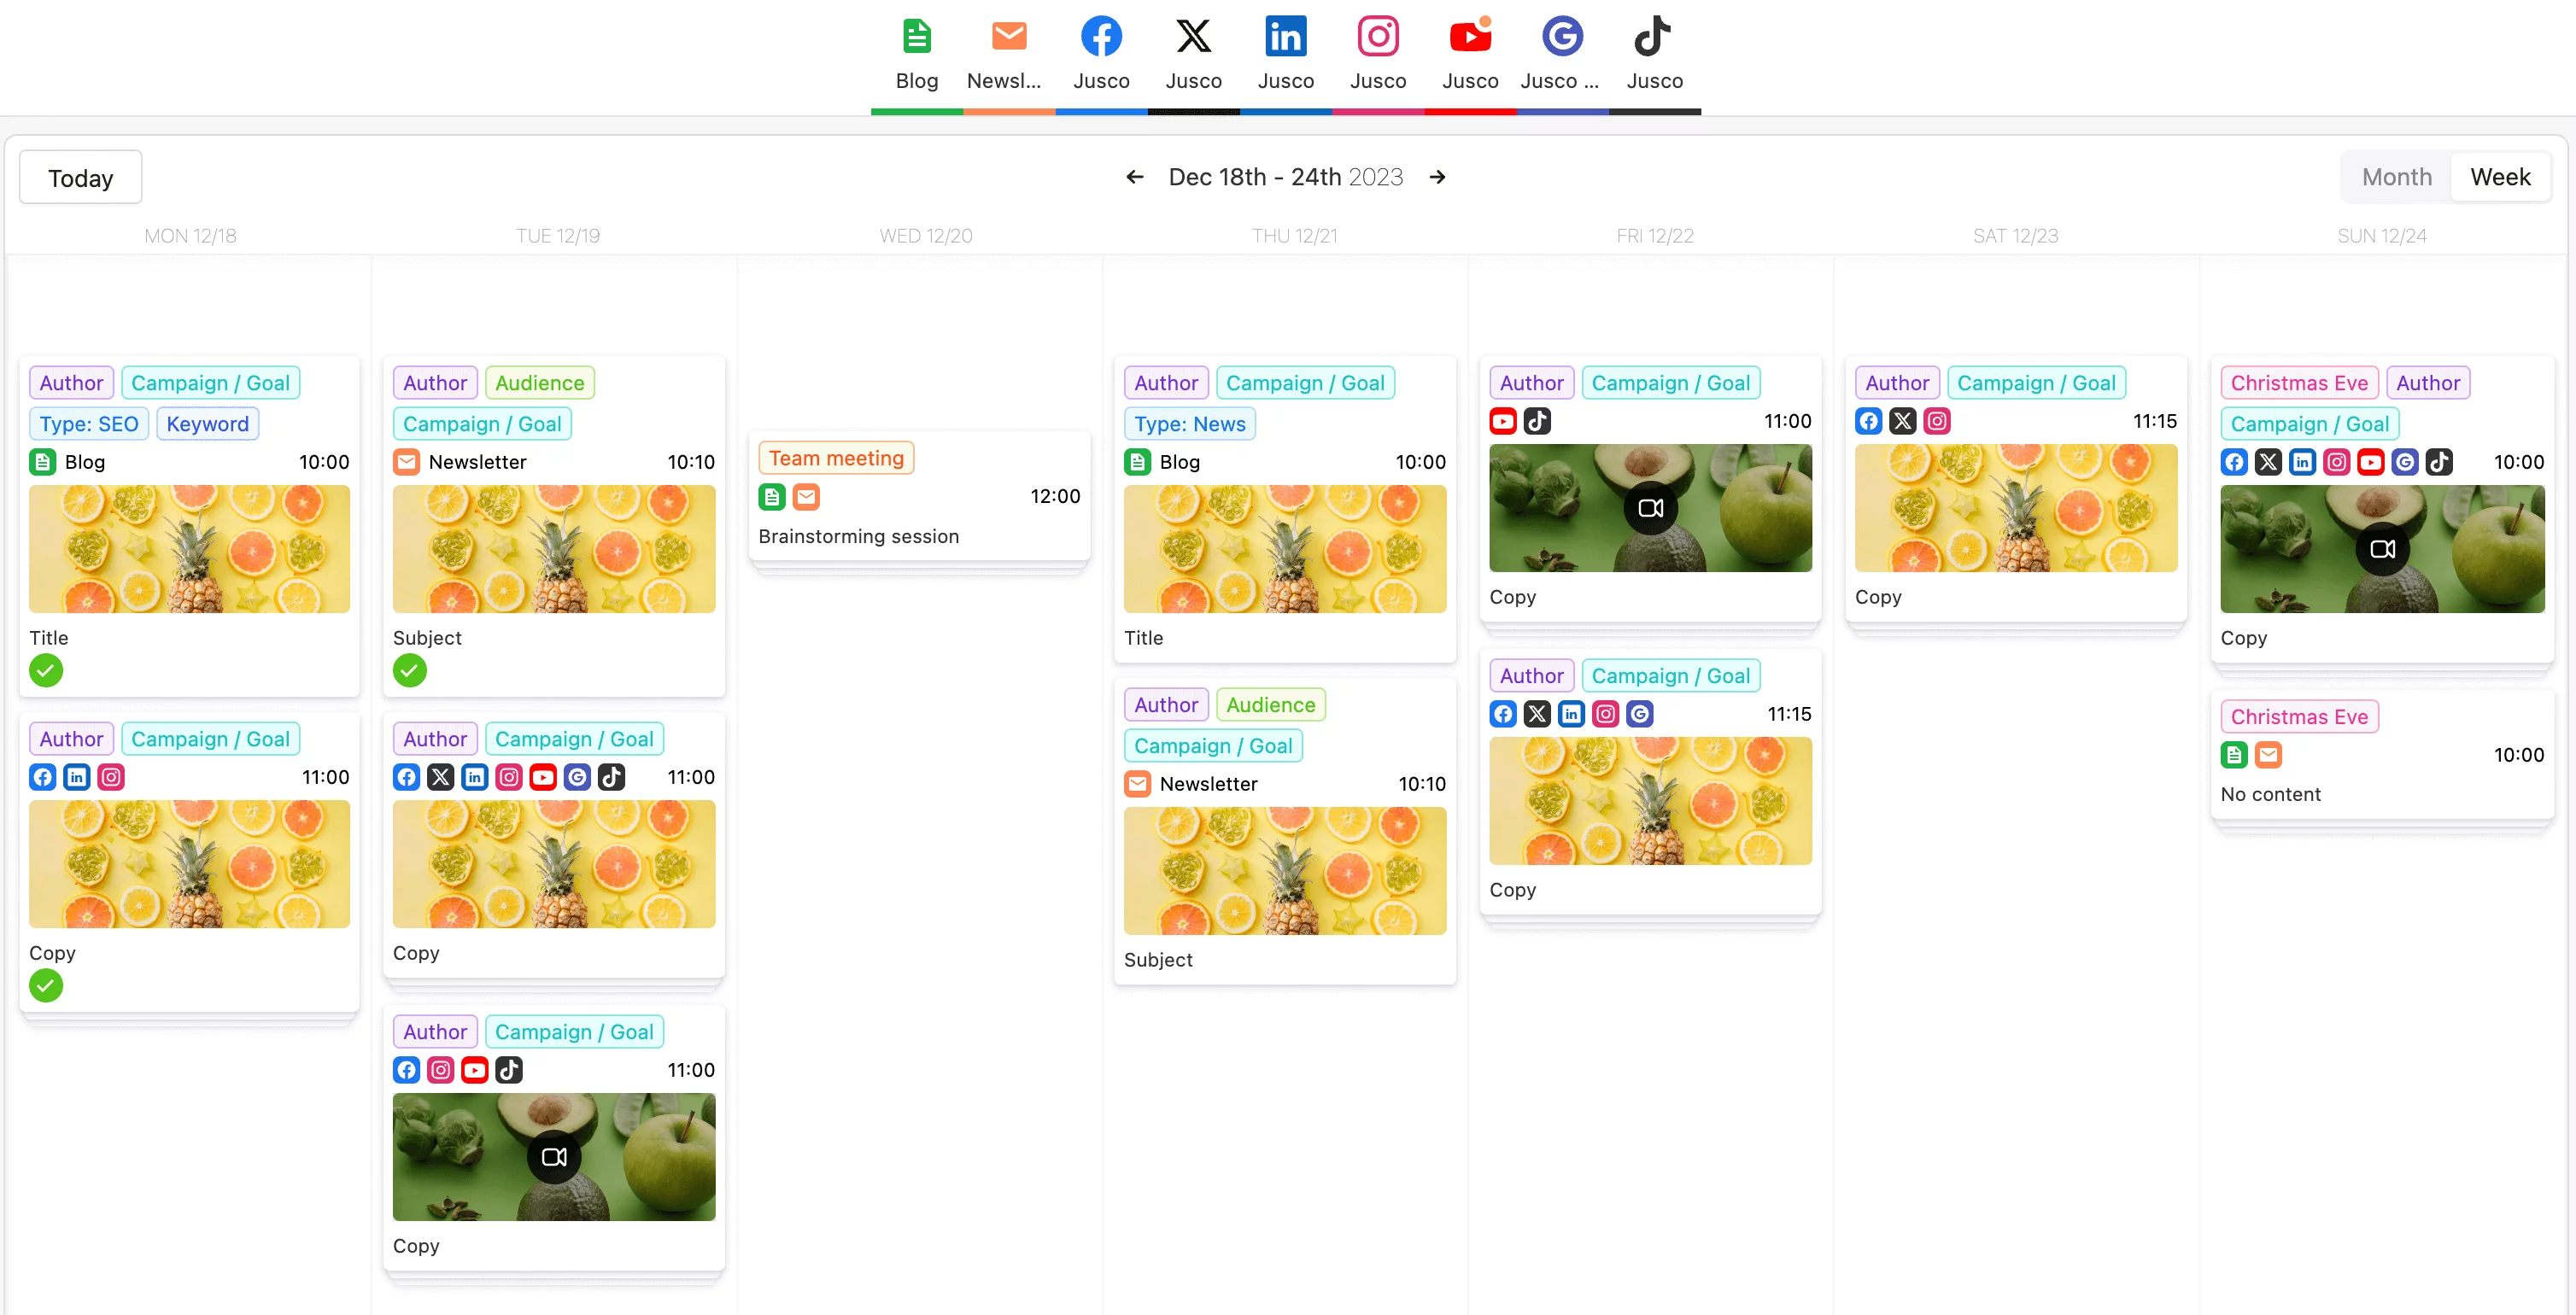 Planable's content calendar with scheduled social media posts for different platforms